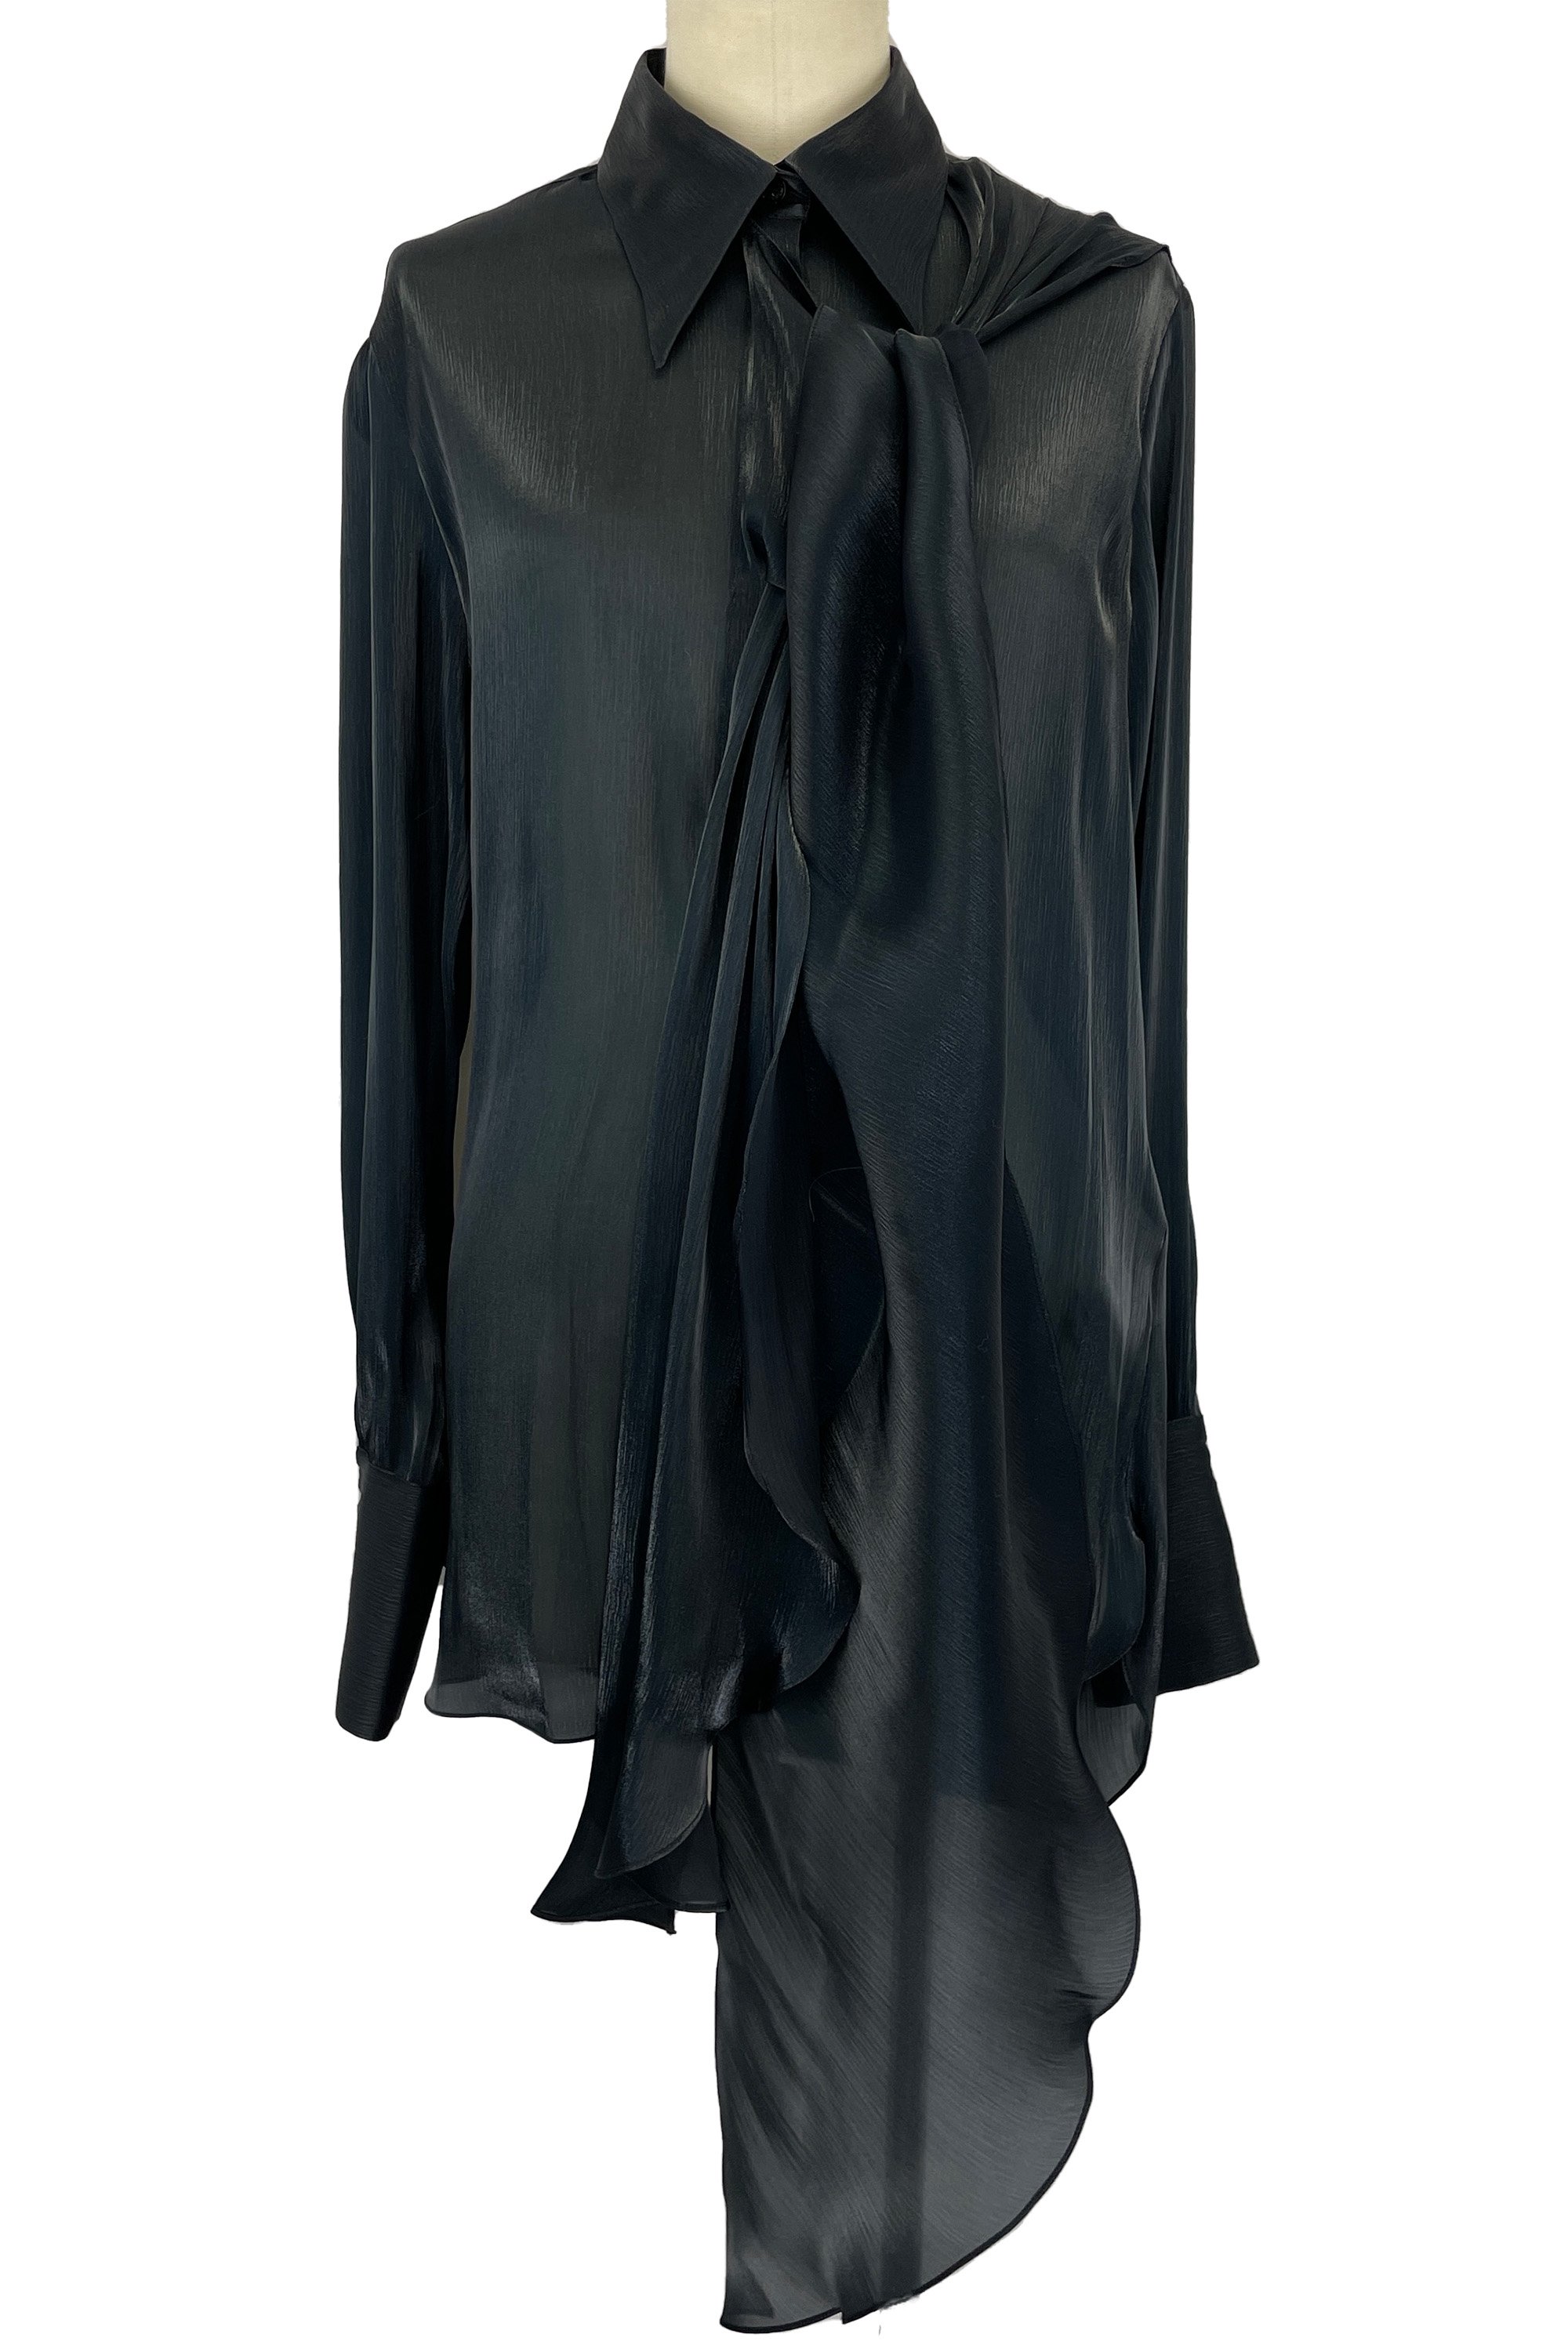 <img class='new_mark_img1' src='https://img.shop-pro.jp/img/new/icons8.gif' style='border:none;display:inline;margin:0px;padding:0px;width:auto;' />VICTORIA BECKHAM Scarf blouse